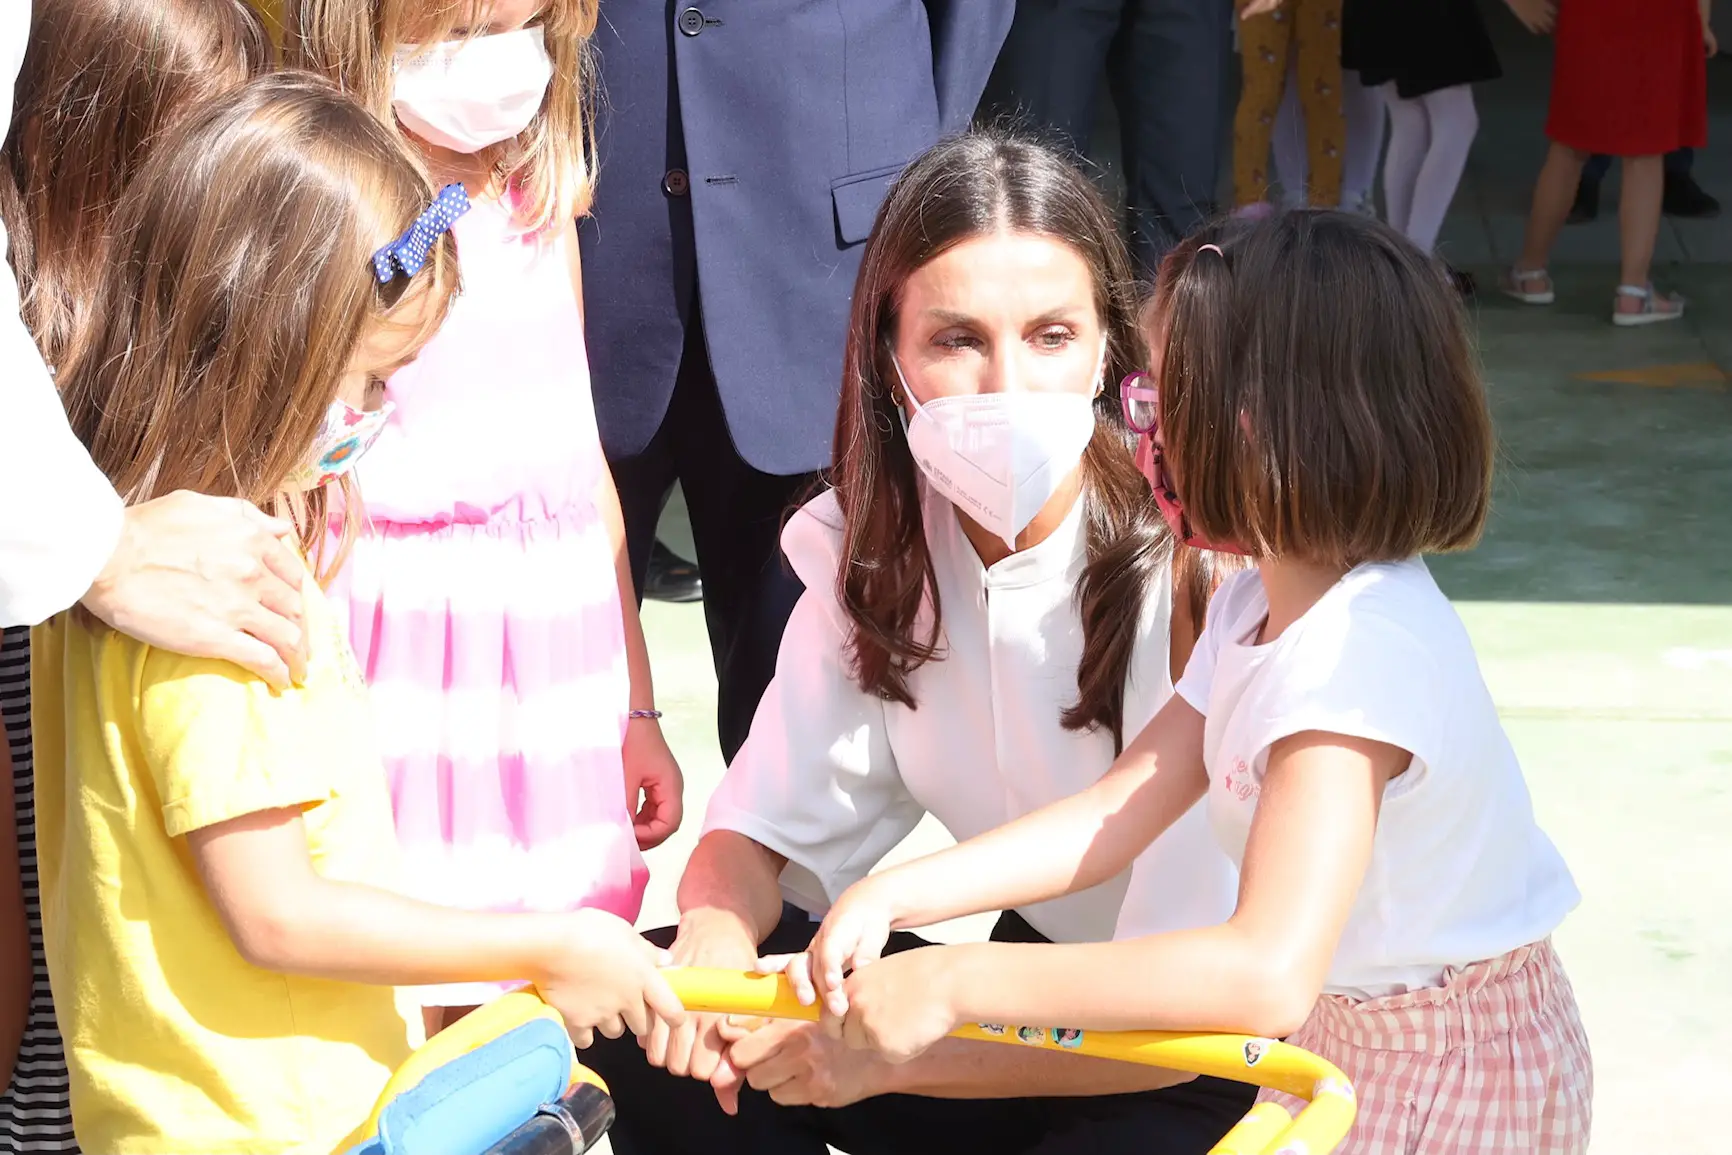 Queen Letizia of Spain chose a monochrome style for School year opening in Zaragoza